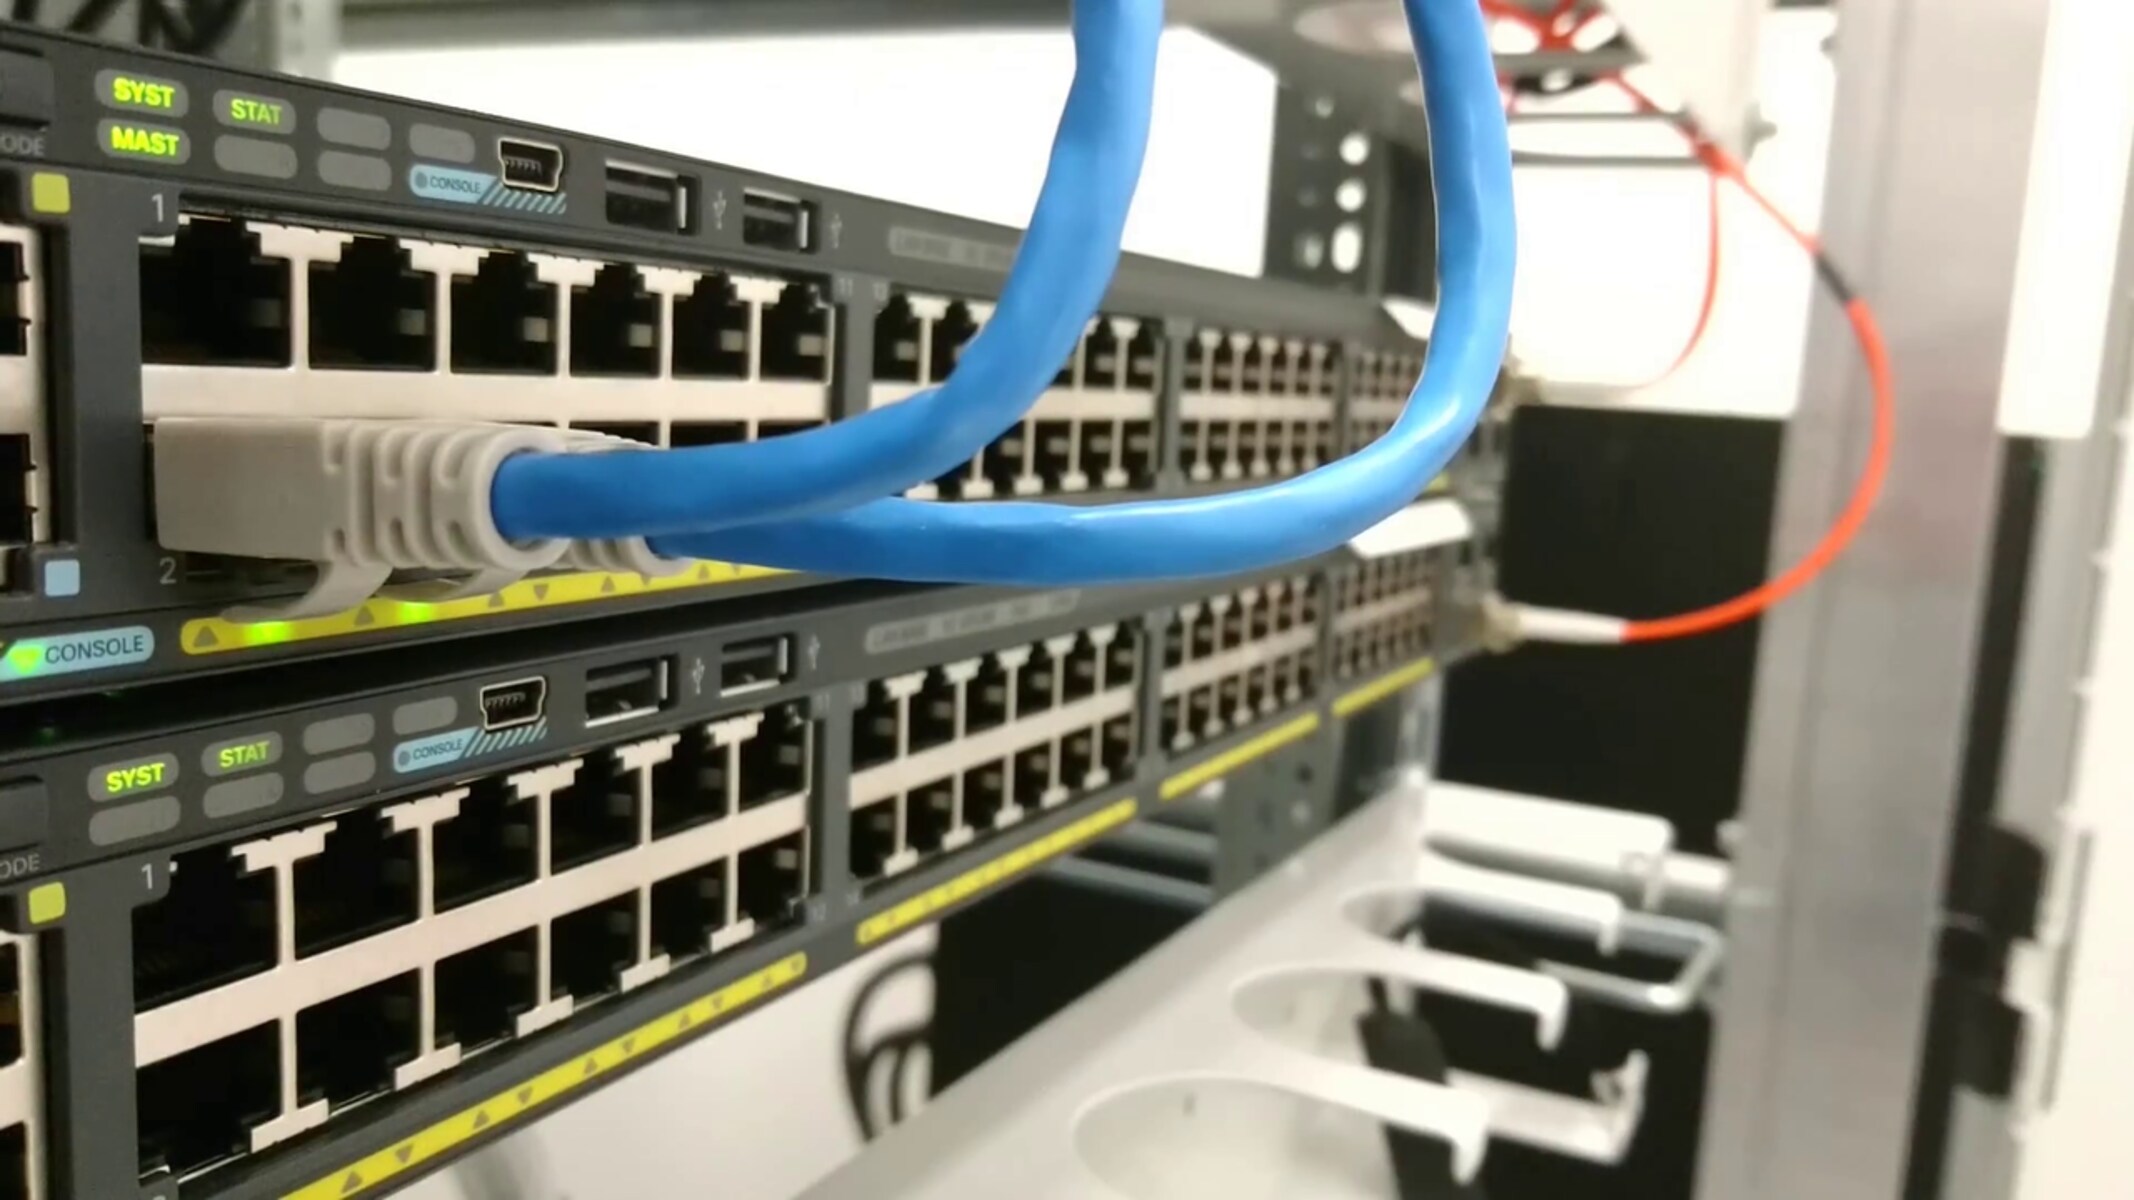 How To Configure An Extreme Network Switch Without A Console Cable